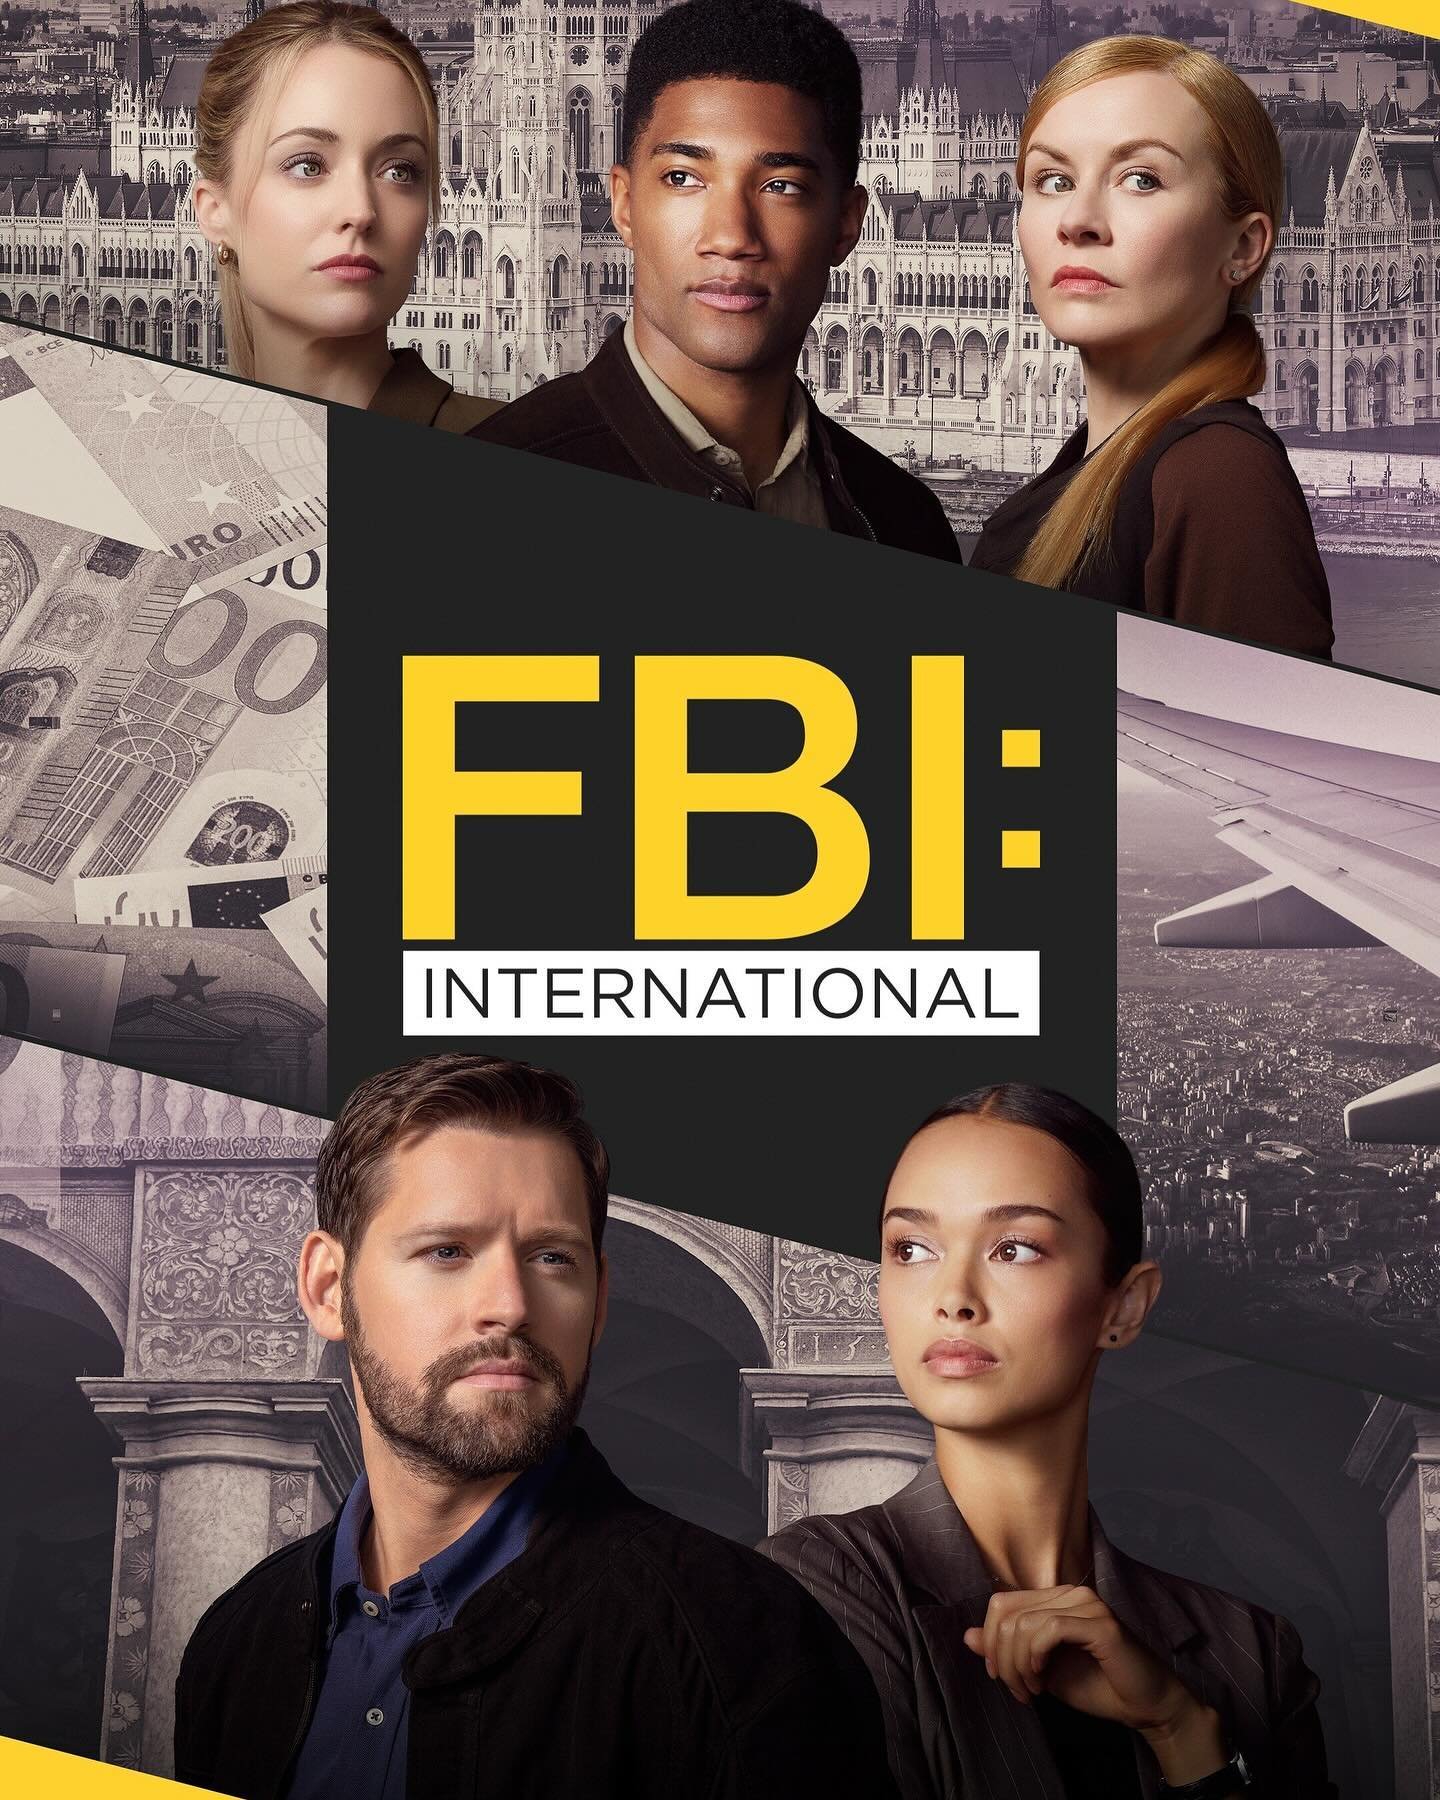 Grab a cuppa and settle in, as FBI International is back and the season finale of series 3 is airing now! 

TCG&rsquo;s Harry Burton appears in episode 8 and will be playing the role as Mattias Trauner. 

Cast by Vicki Thomson 

@harry_matt_burton @f